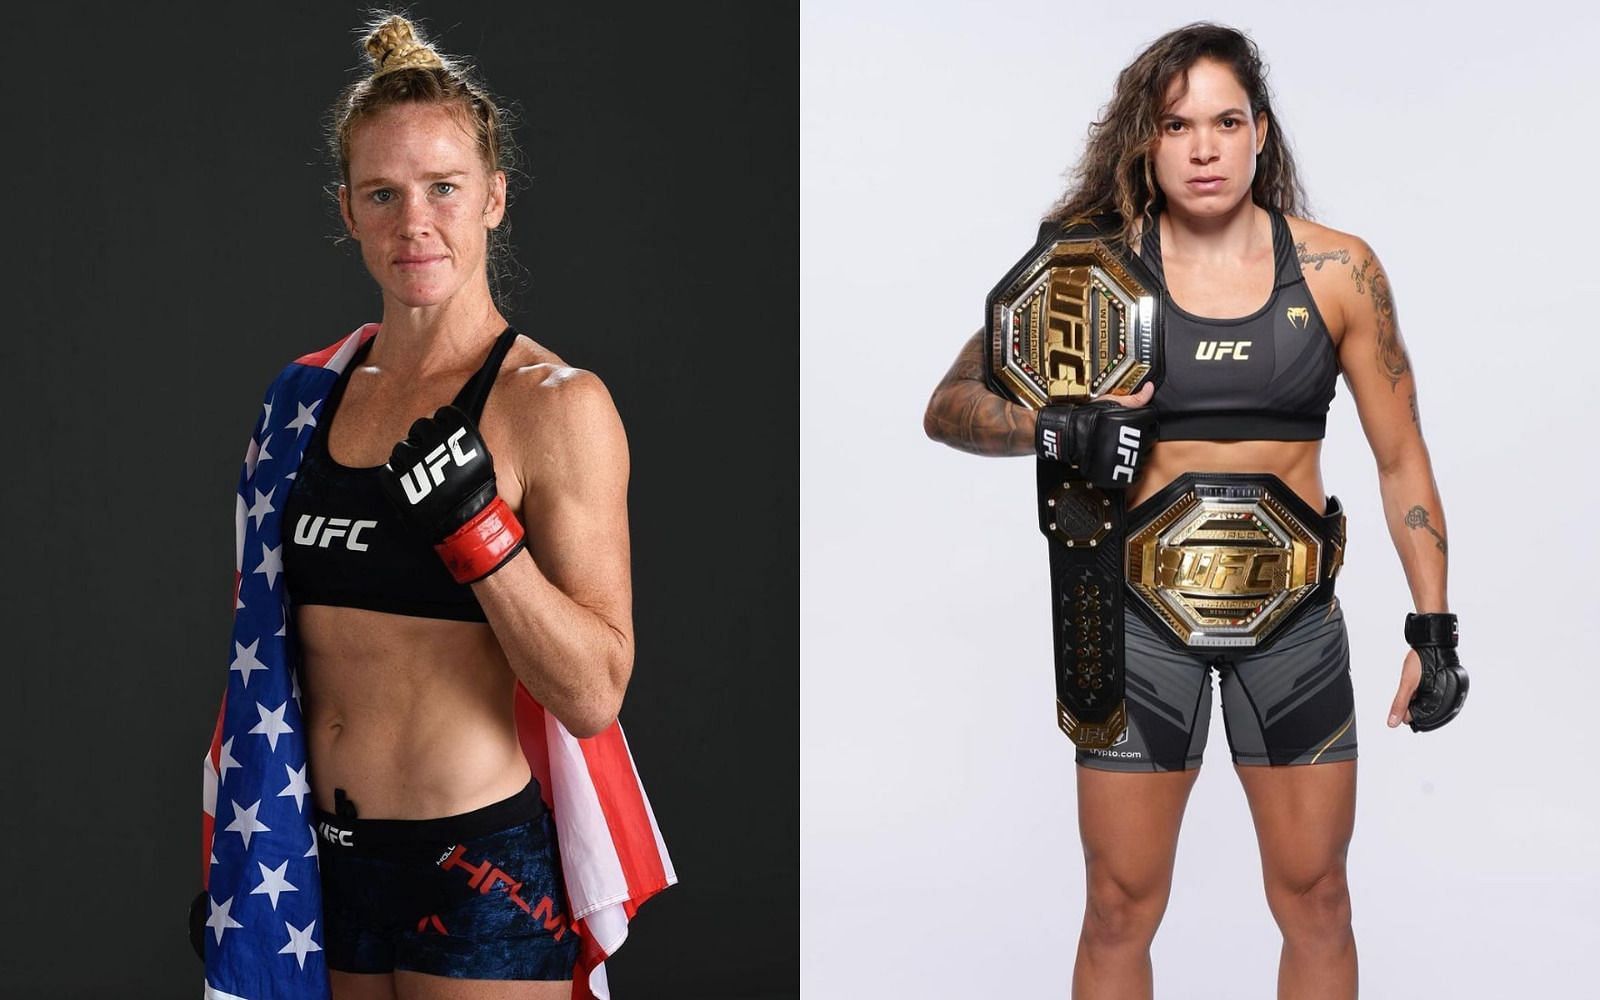 Holly Holm (left) is prepared to welcome back Amanda Nunes (right) from her retirement [Image via: @hollyholm and @amanda_leoa on Instagram]